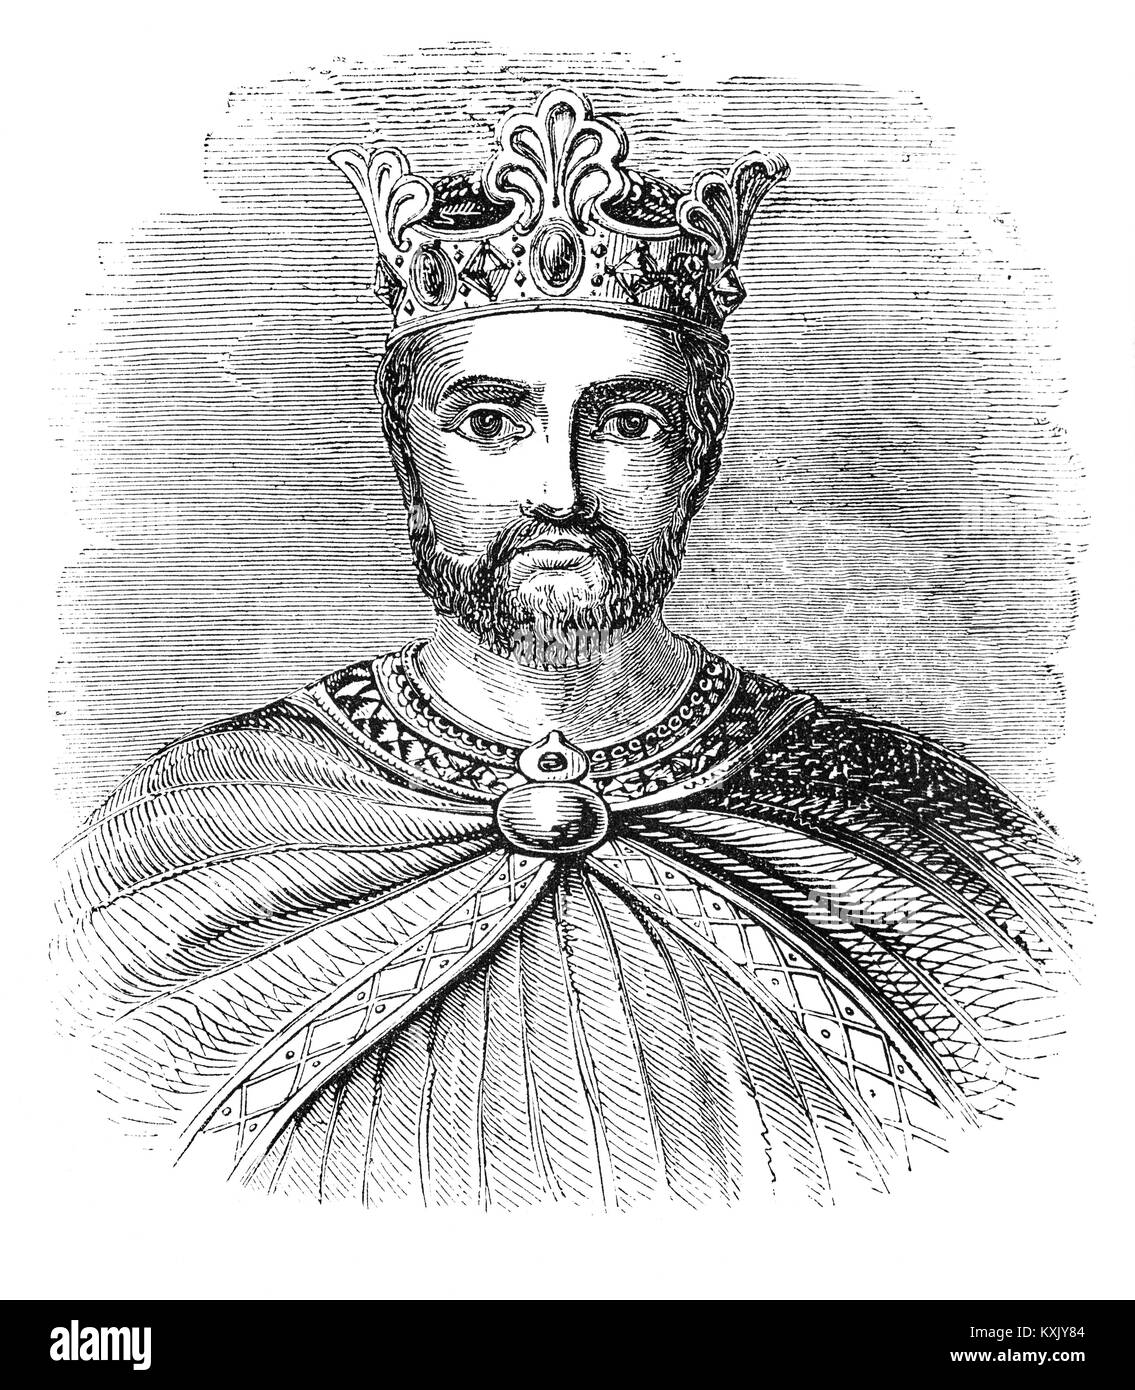 King Richard I (1157 – 1199) was King of England from 6 July 1189 until his death.  The third of five sons of King Henry II of England and Duchess Eleanor of Aquitaine, he was also known as Richard Cœur de Lion or Richard the Lionheart because of his reputation as a great military leader and warrior. Stock Photo